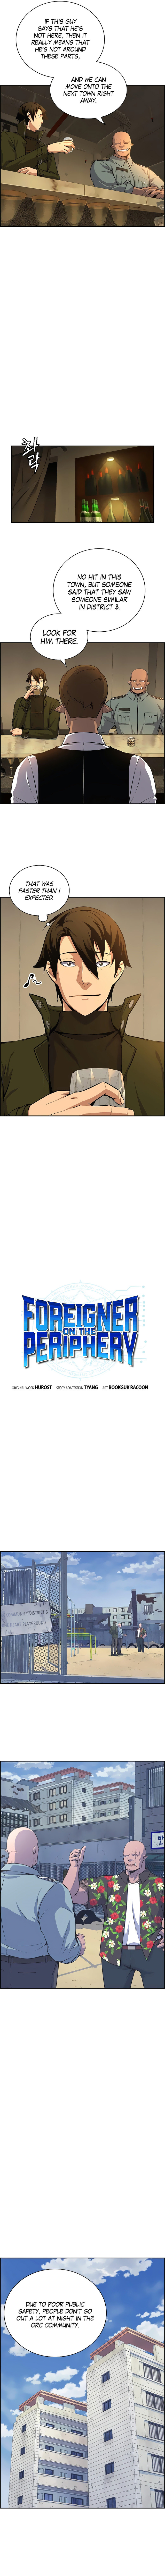 Foreigner on the Periphery - Chapter 5 Page 3